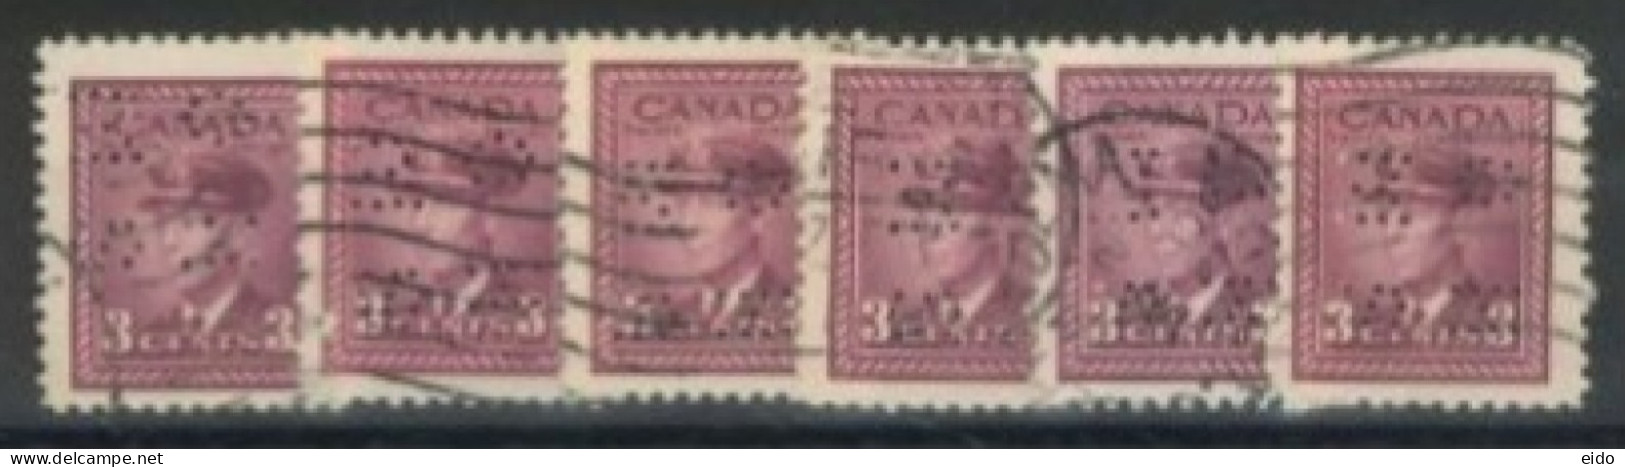 CANADA - 1942, KING GEORGE VI IN NAVAL UNIFORM STAMPS QTY. OF 6, WITH REDUCED SPECIAL PRICE, USED. - Usati